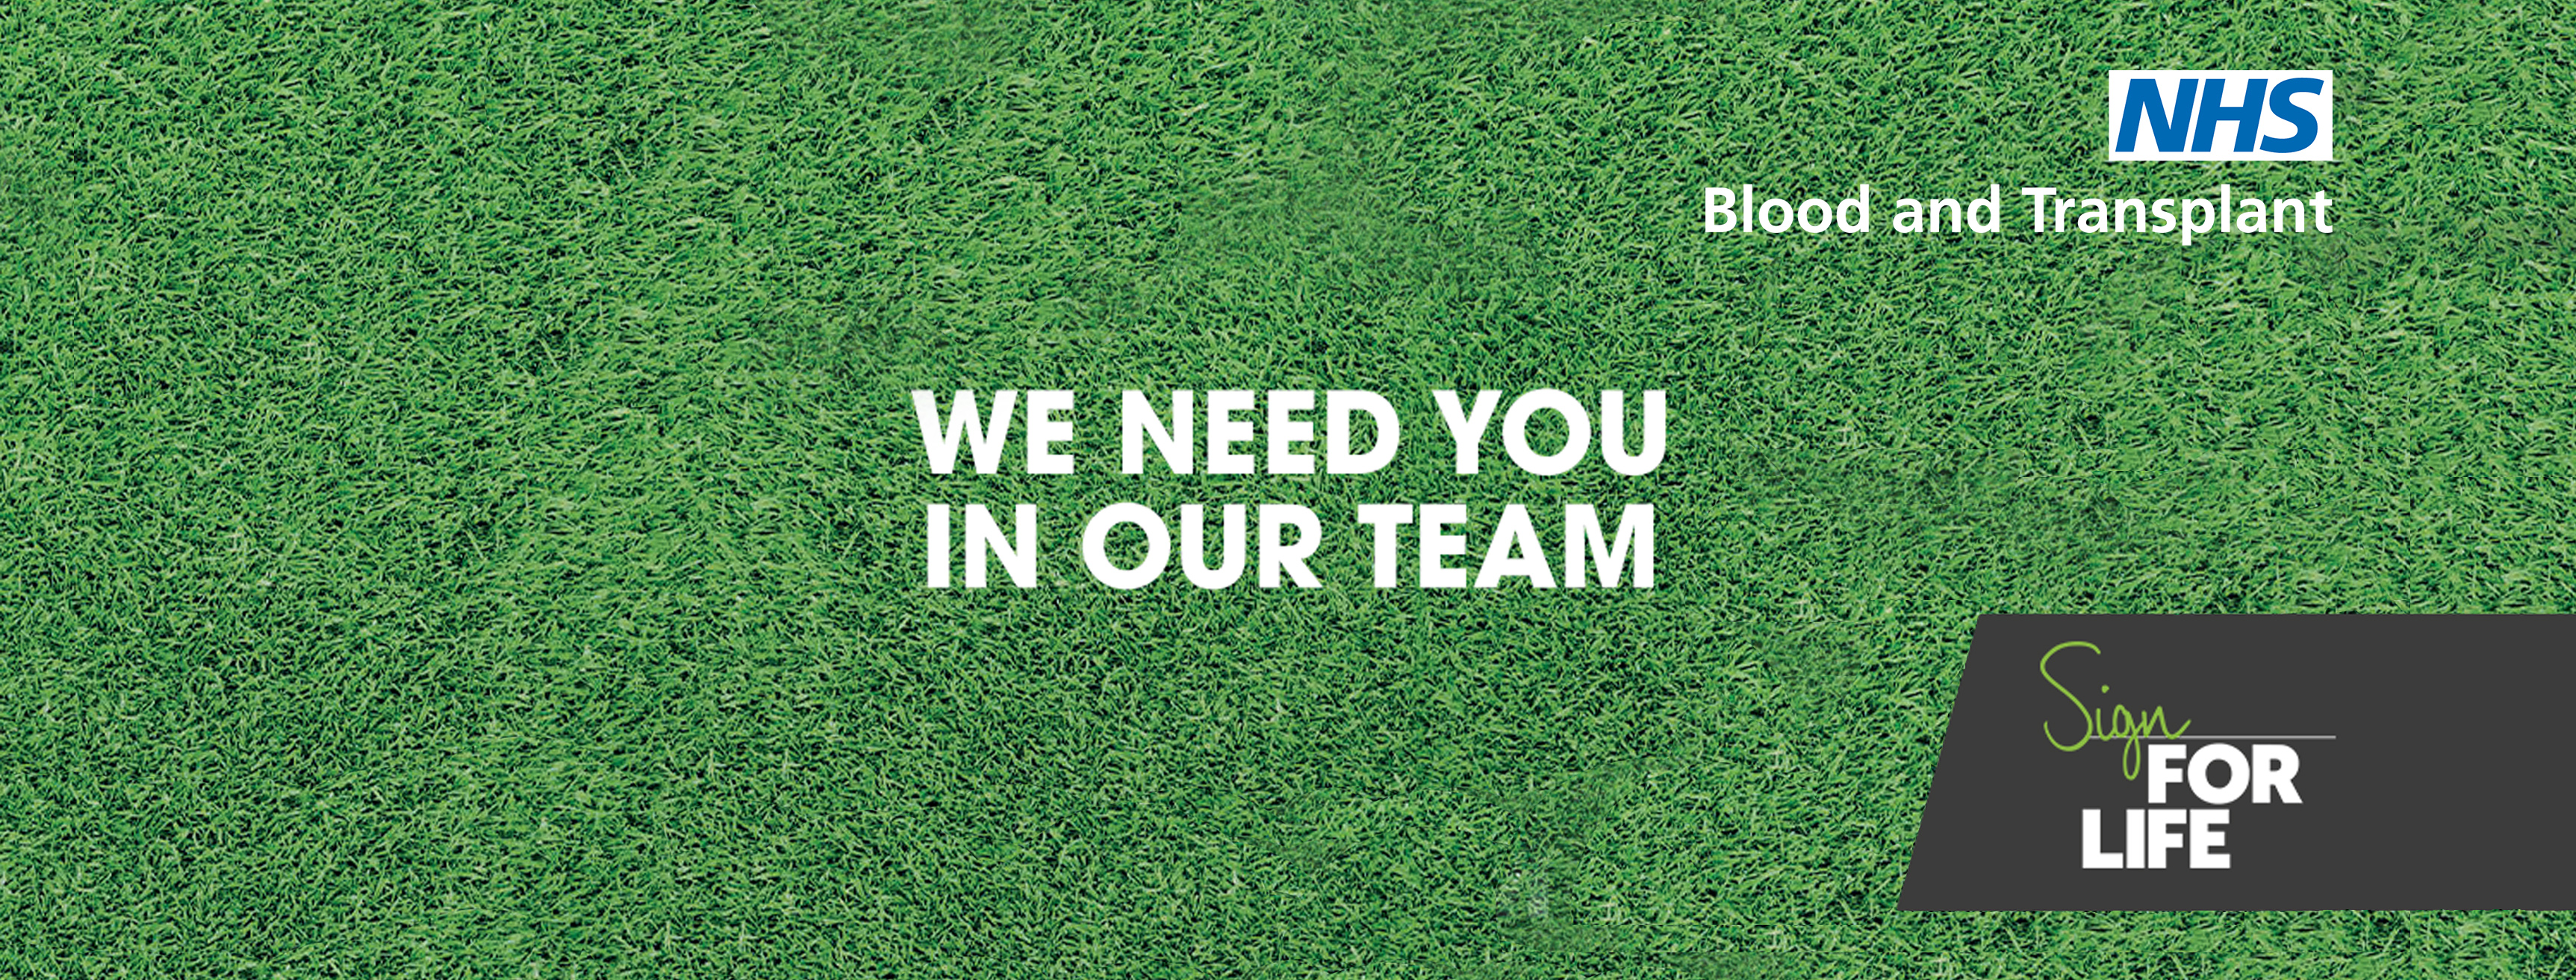 We need you in our team Facebook cover